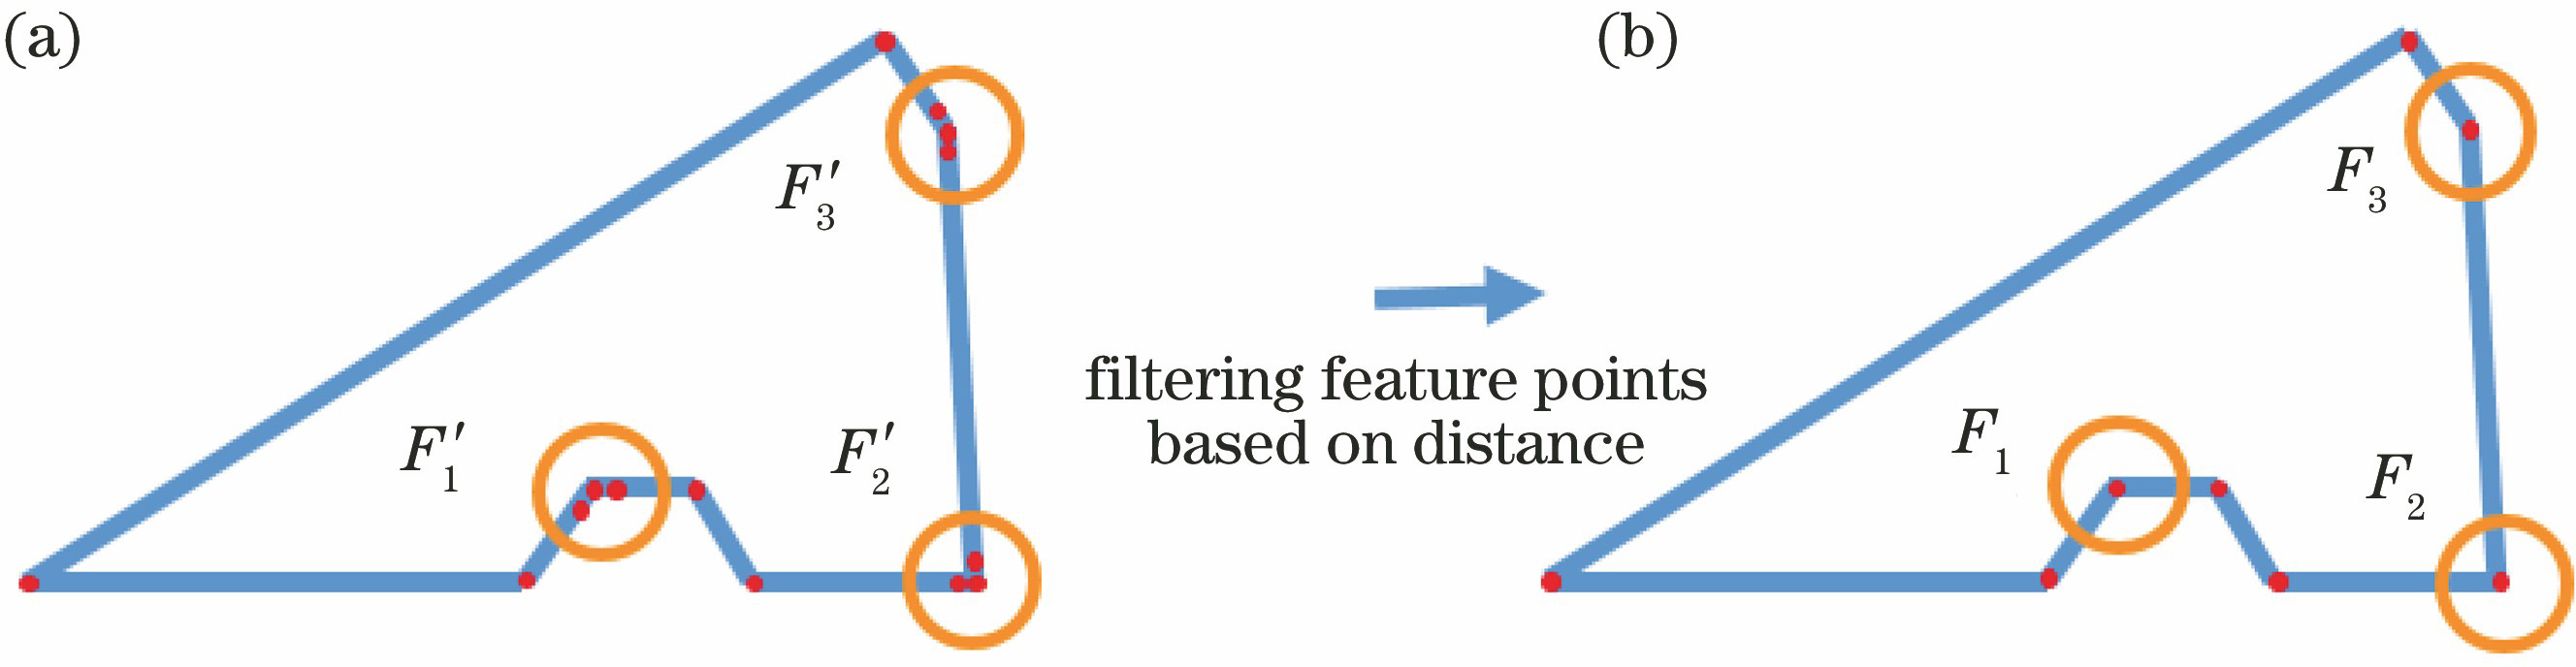 Feature points clustering based on Euclidean distance